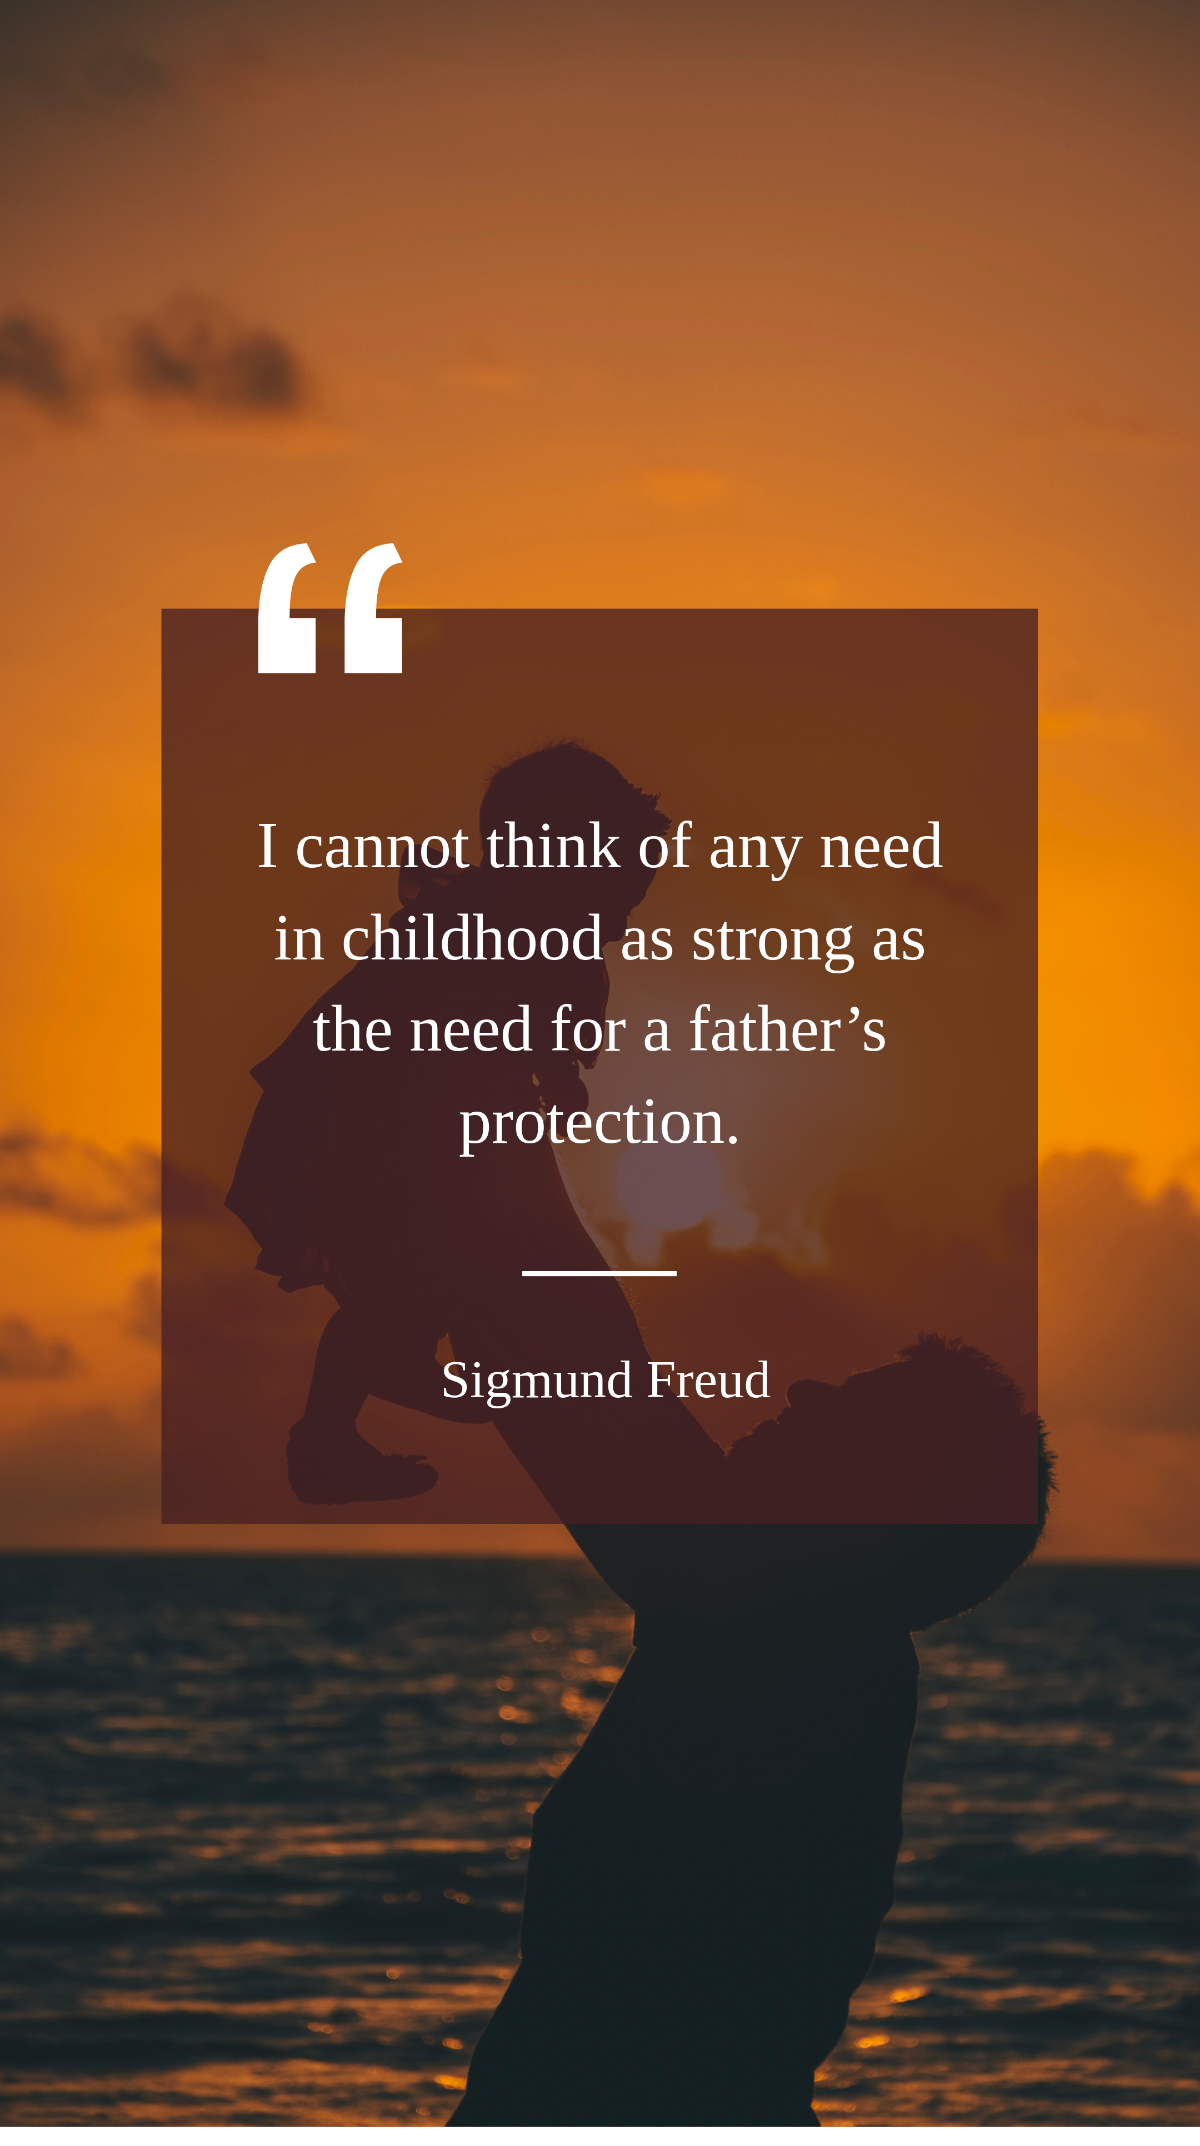 Sigmund Freud - I cannot think of any need in childhood as strong as the need for a father’s protection. Template